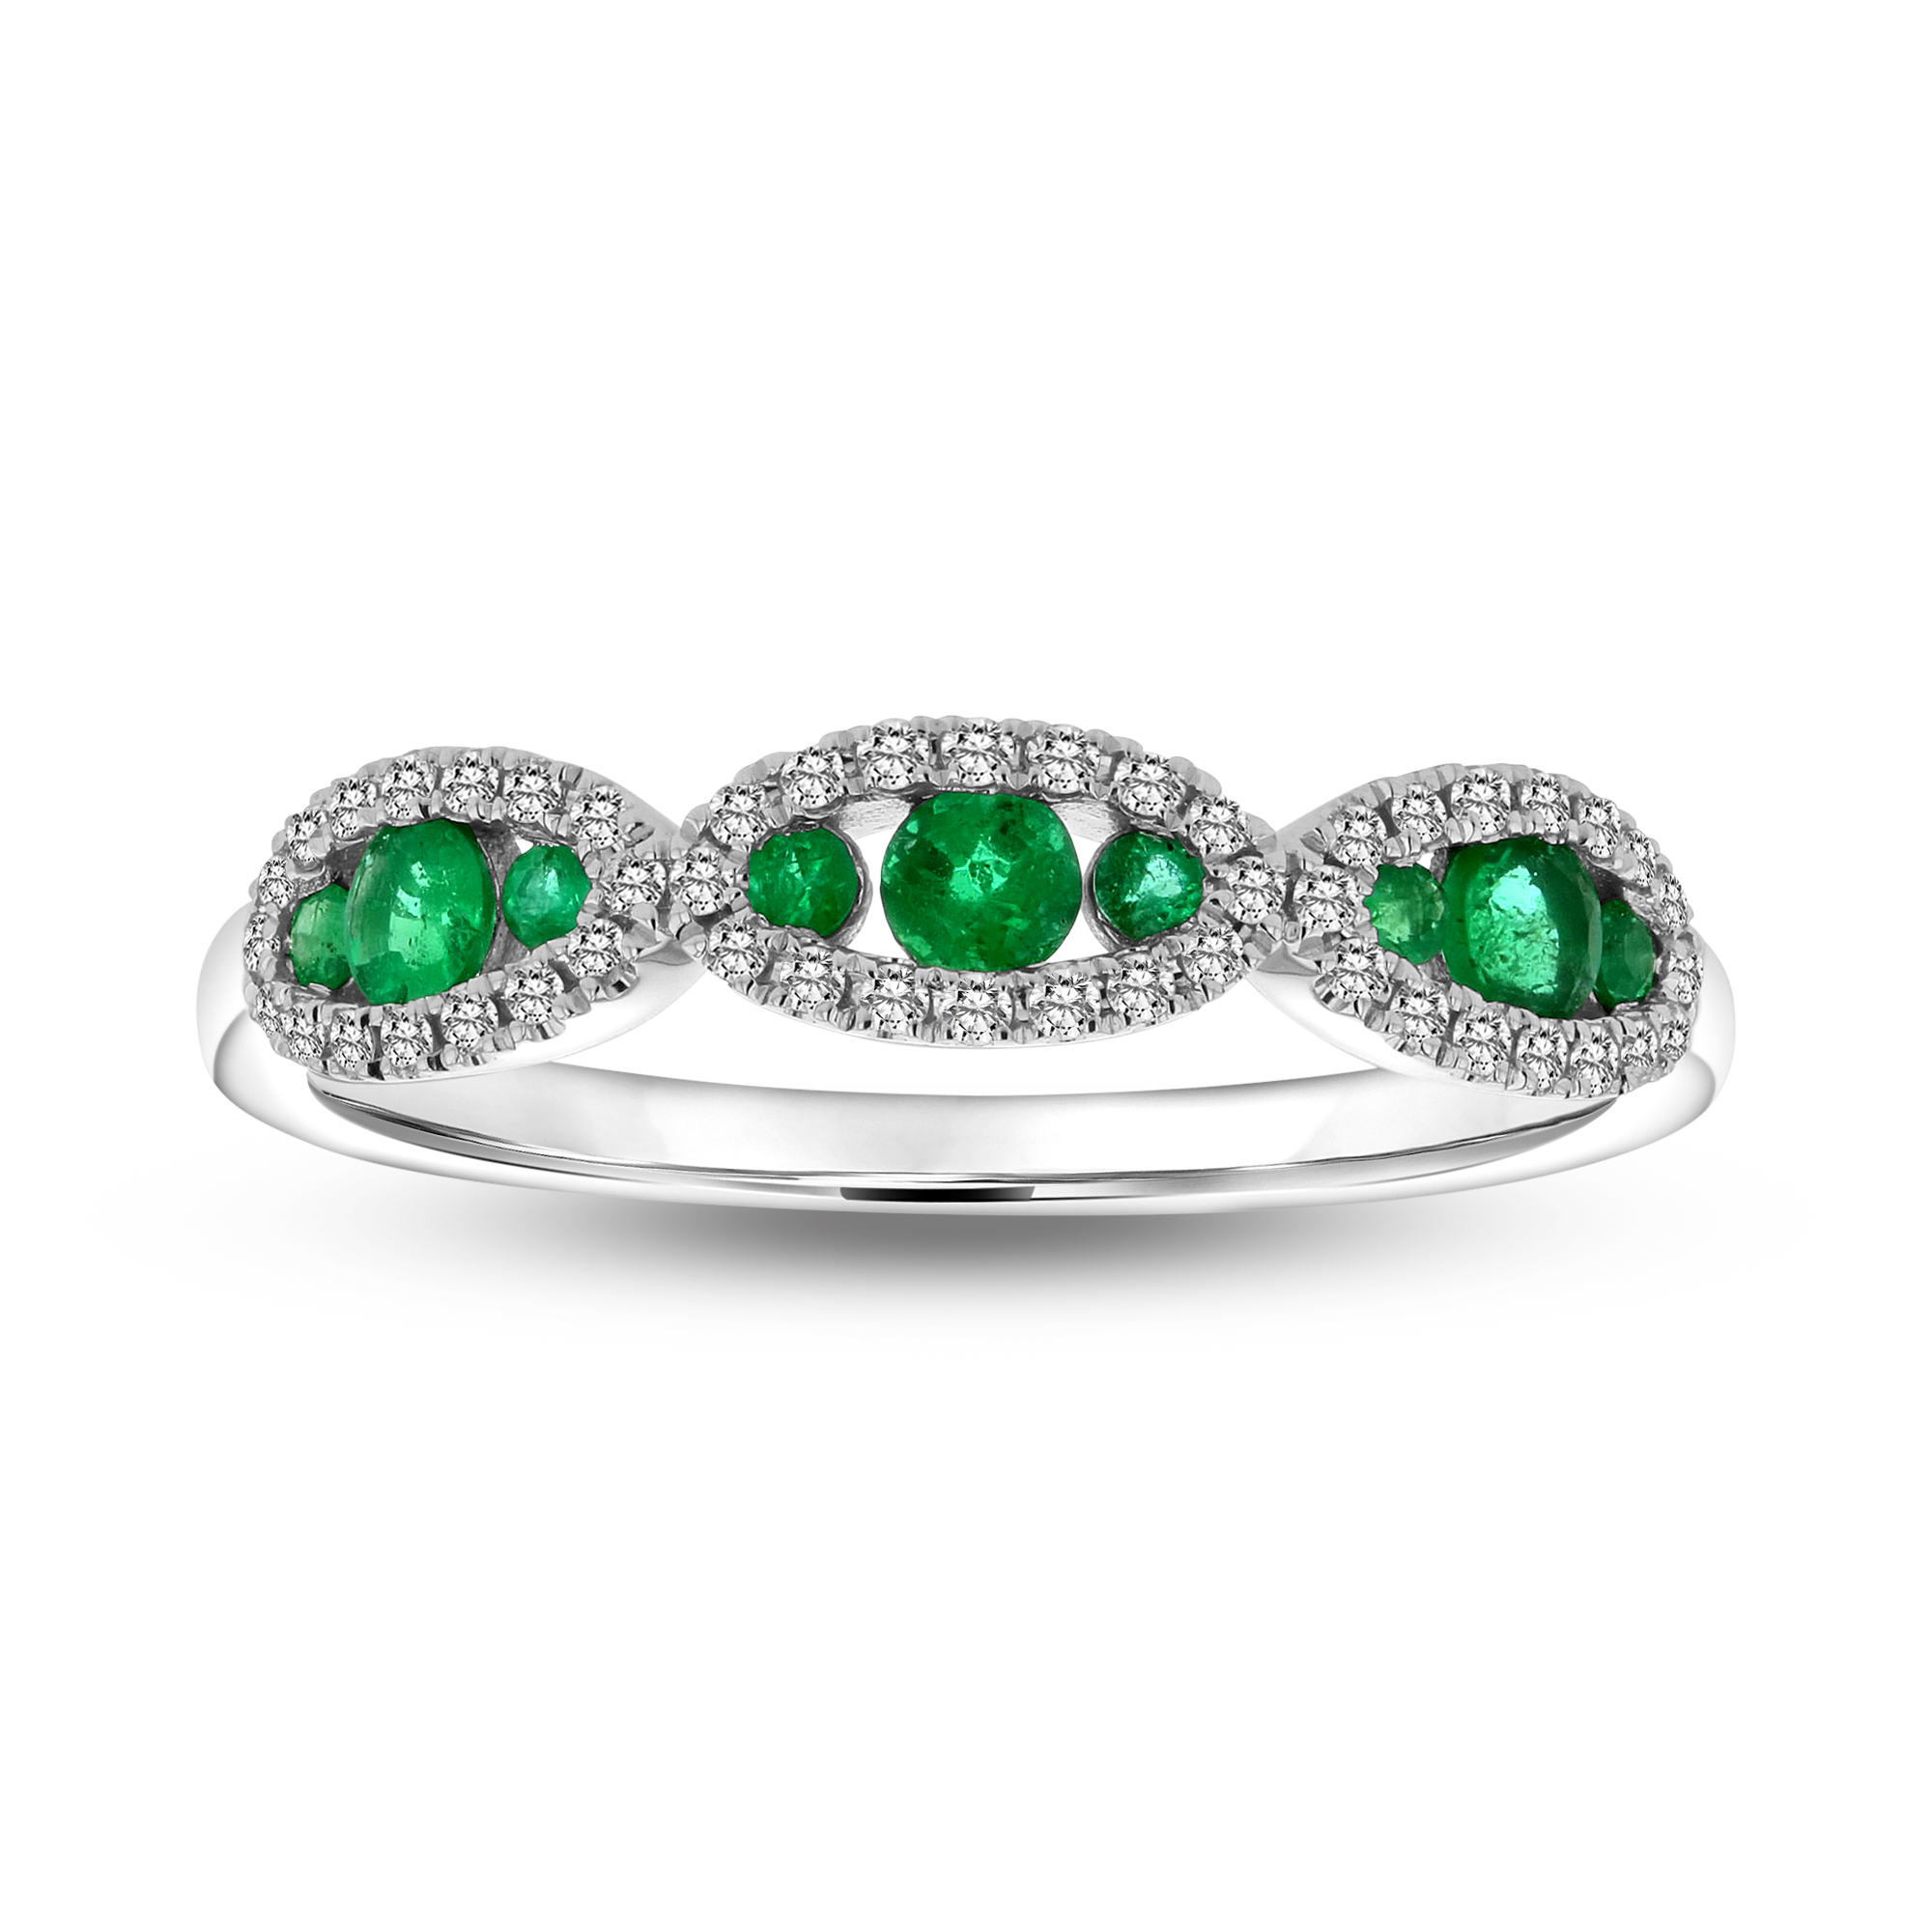 0.43ctw Diamond and Emerald Band in 14k White Gold